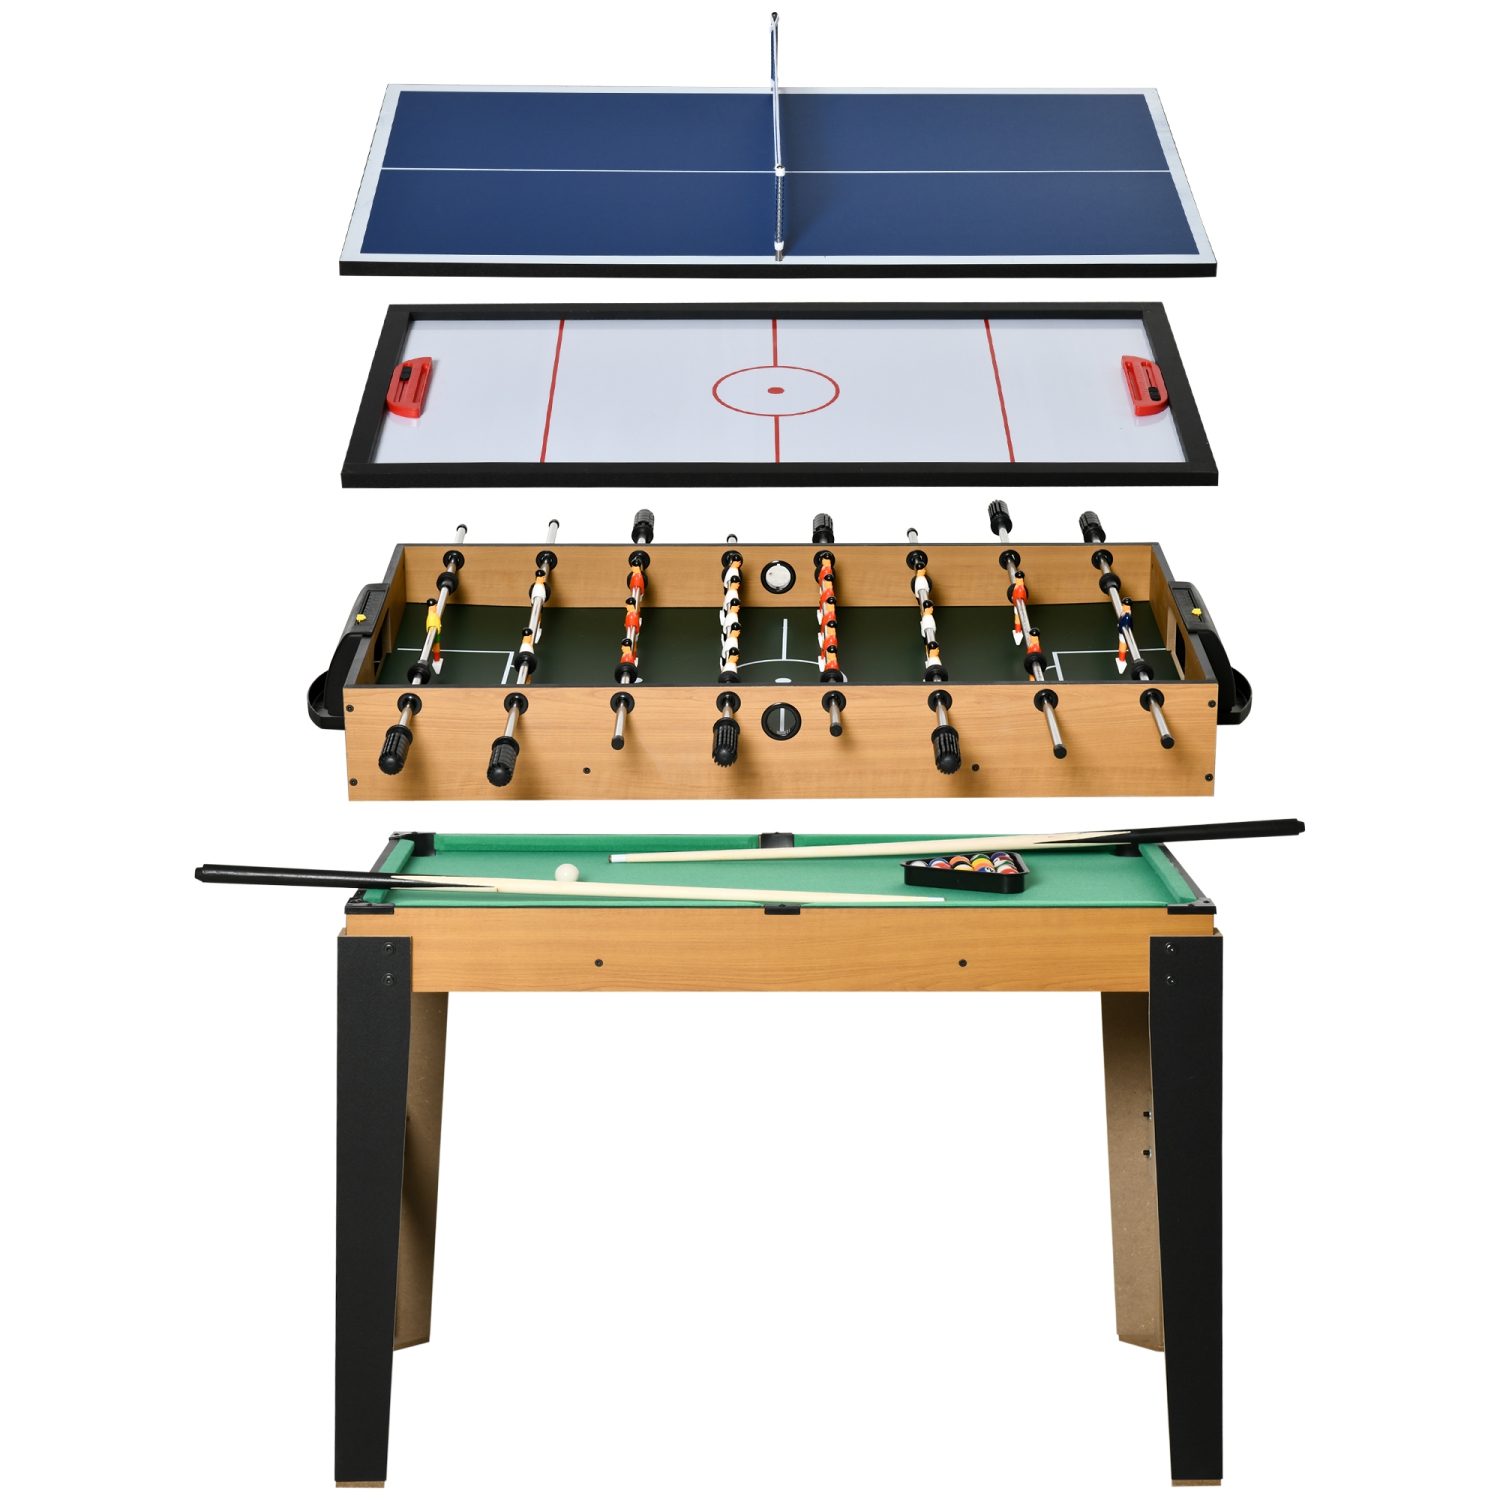 Soozier 43'' 4-in-1 Multi-Gaming Table, Tabletop Billiards Hockey Table Tennis Foosball Game, Easy Set up for Whole Family, Compact for Storage, with Score Boards, Balls, Cues, Chalk, Brush